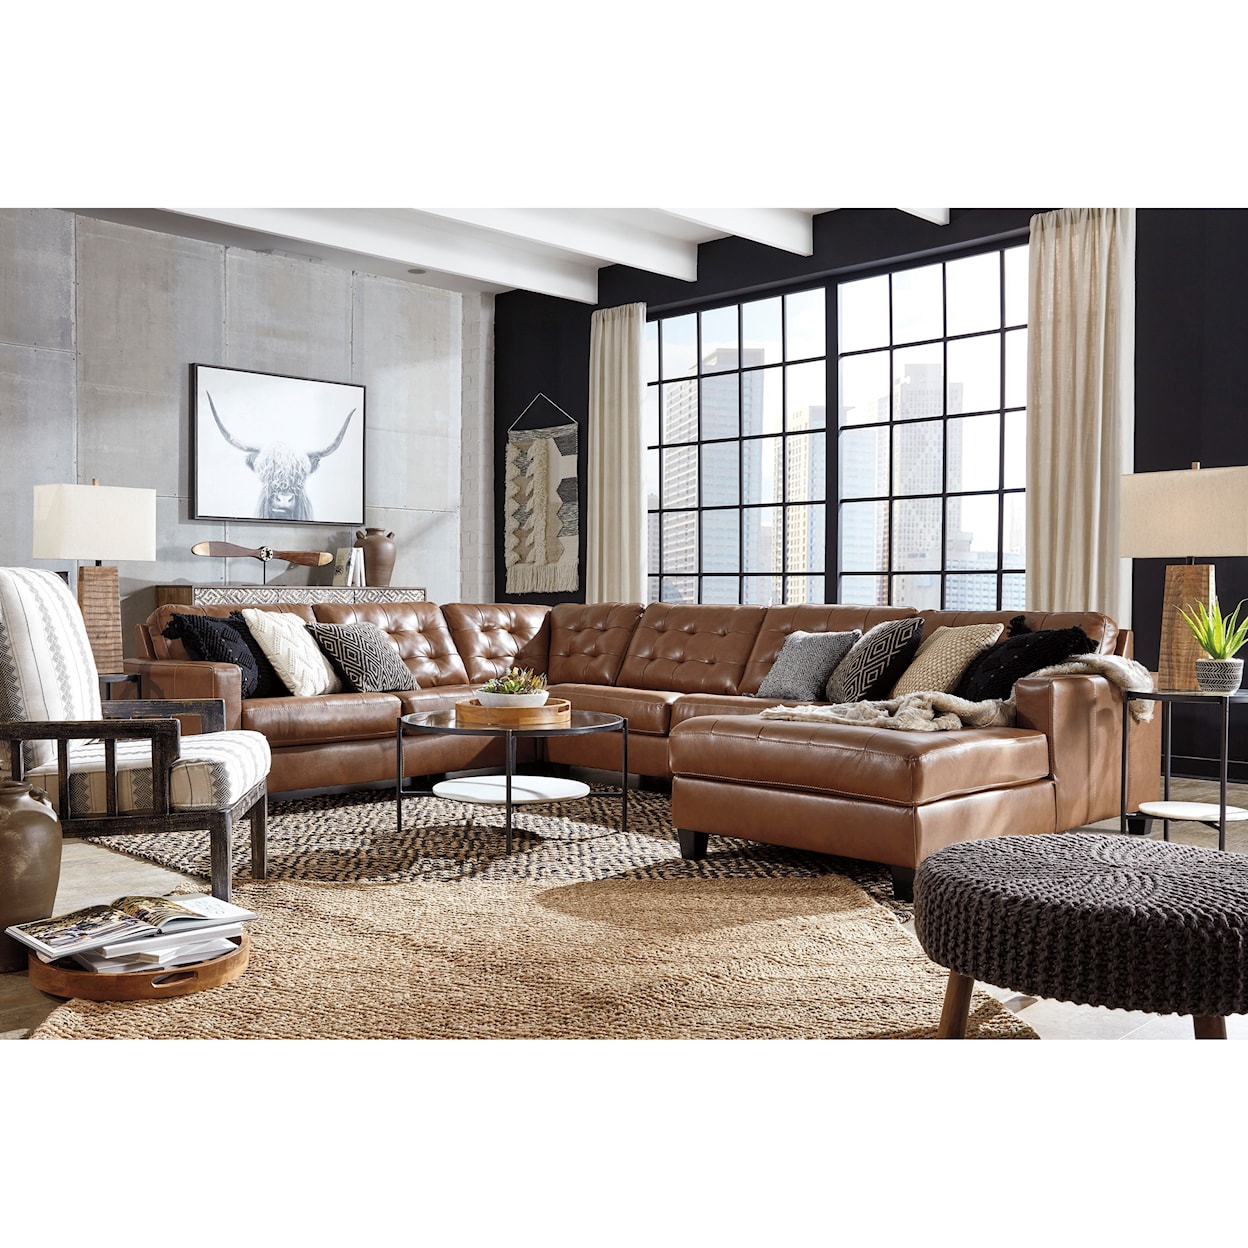 Signature Design by Ashley Baskove 4-Piece Sectional